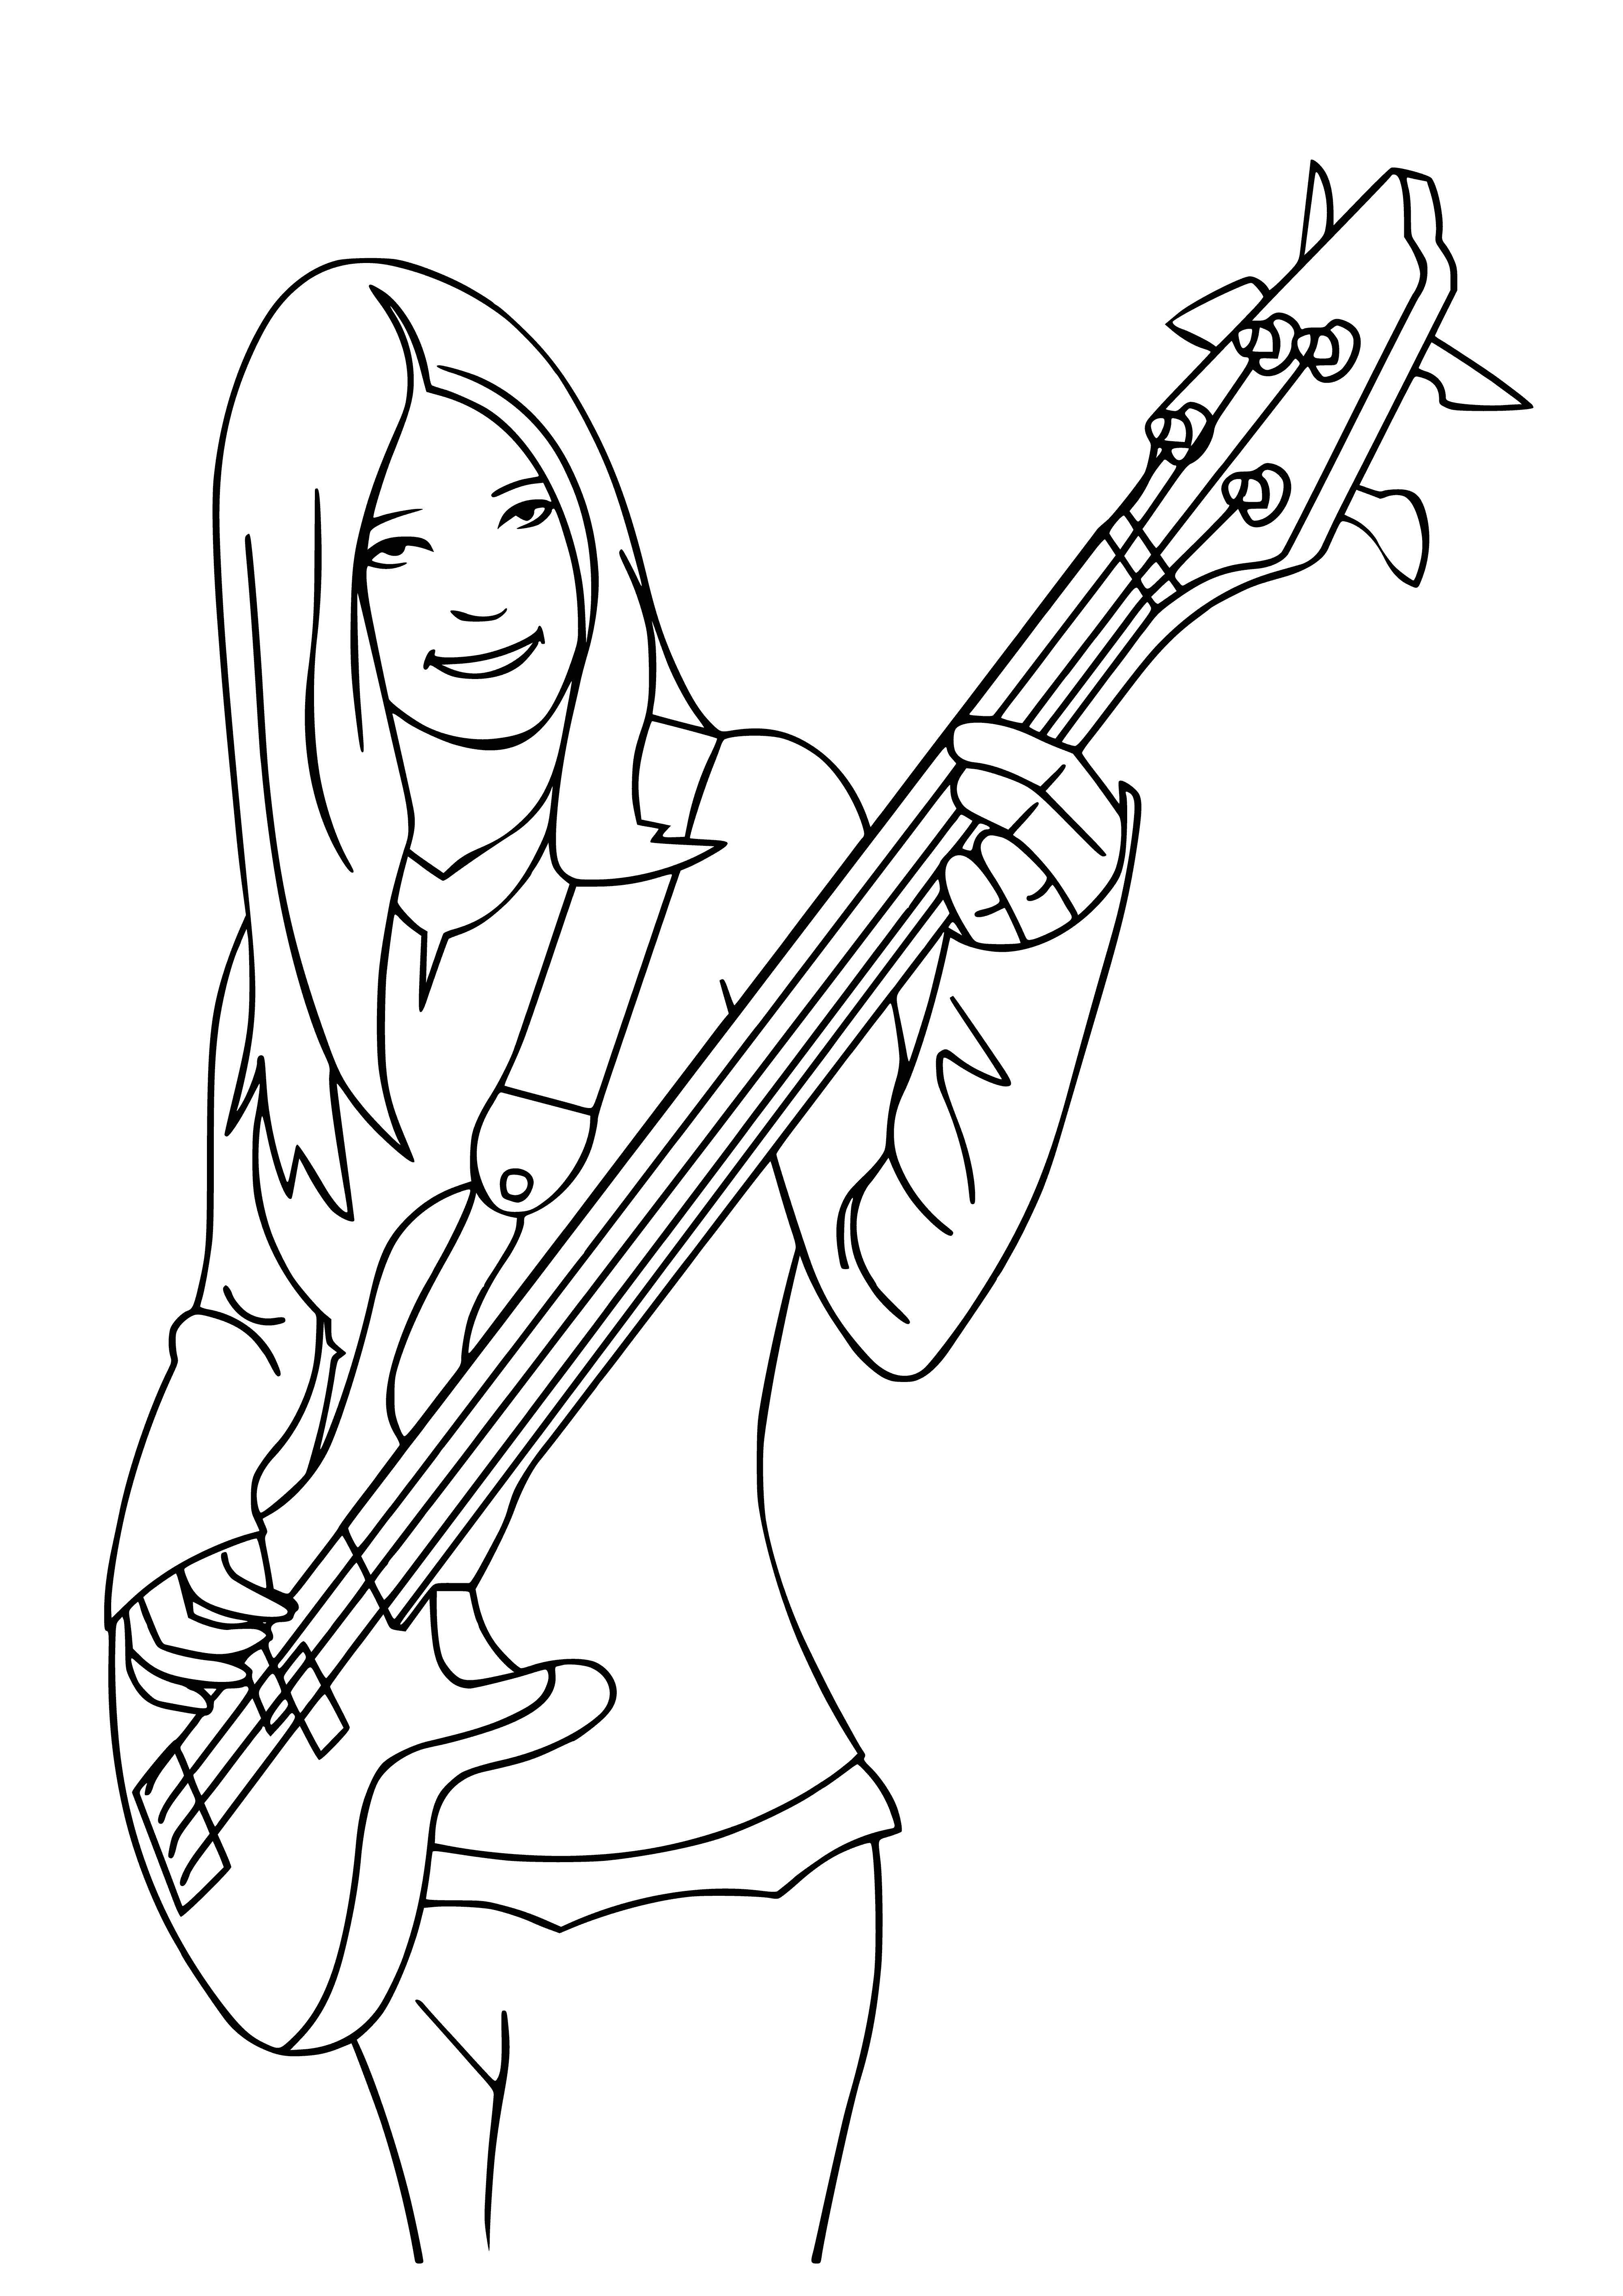 Guitarist coloring page